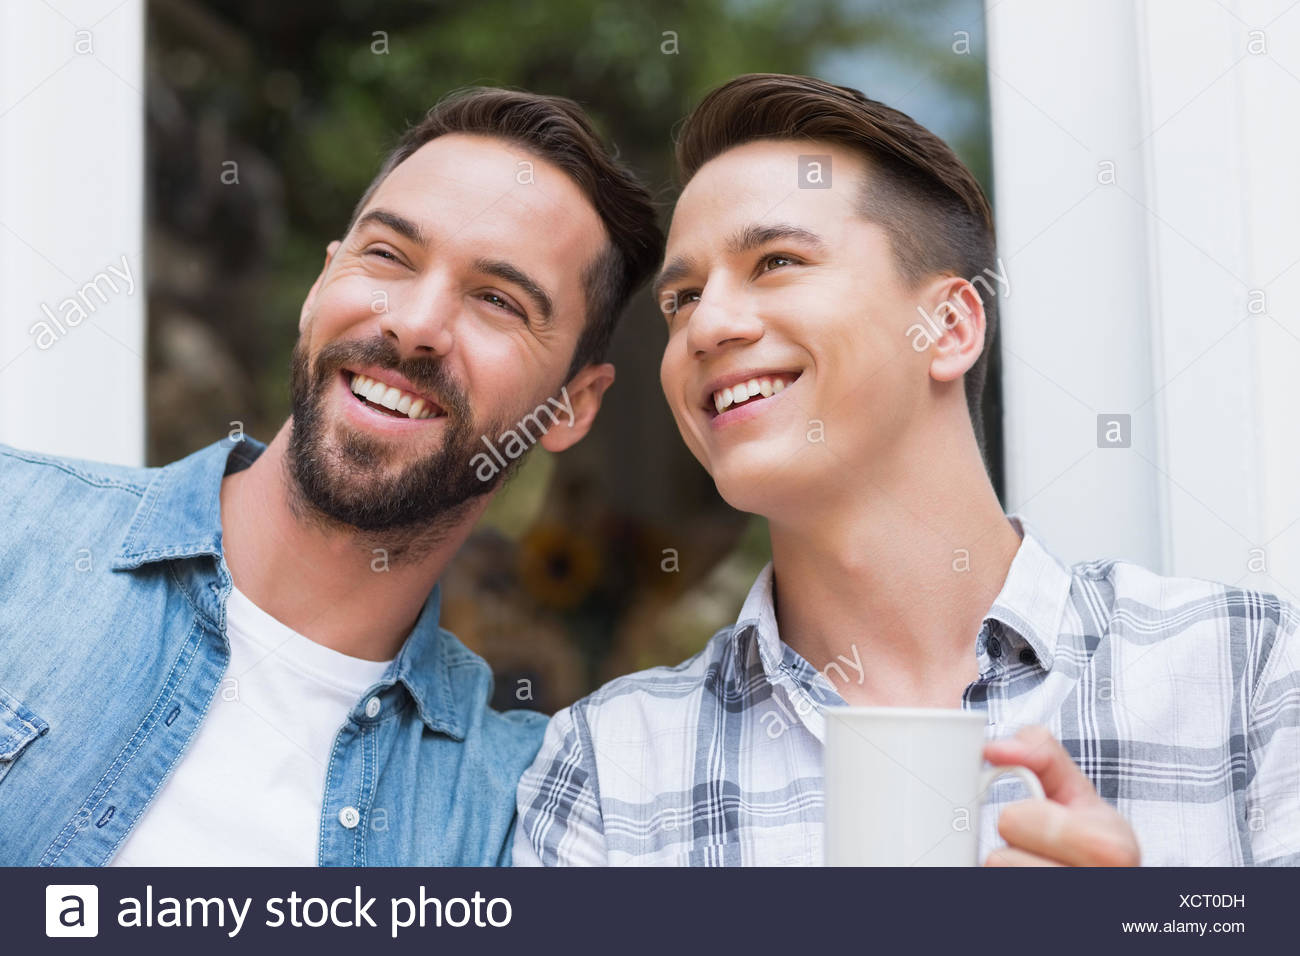 Couple Hot Gay Stock Photos & Couple Hot Gay Stock Images - Page 3 - Alamy